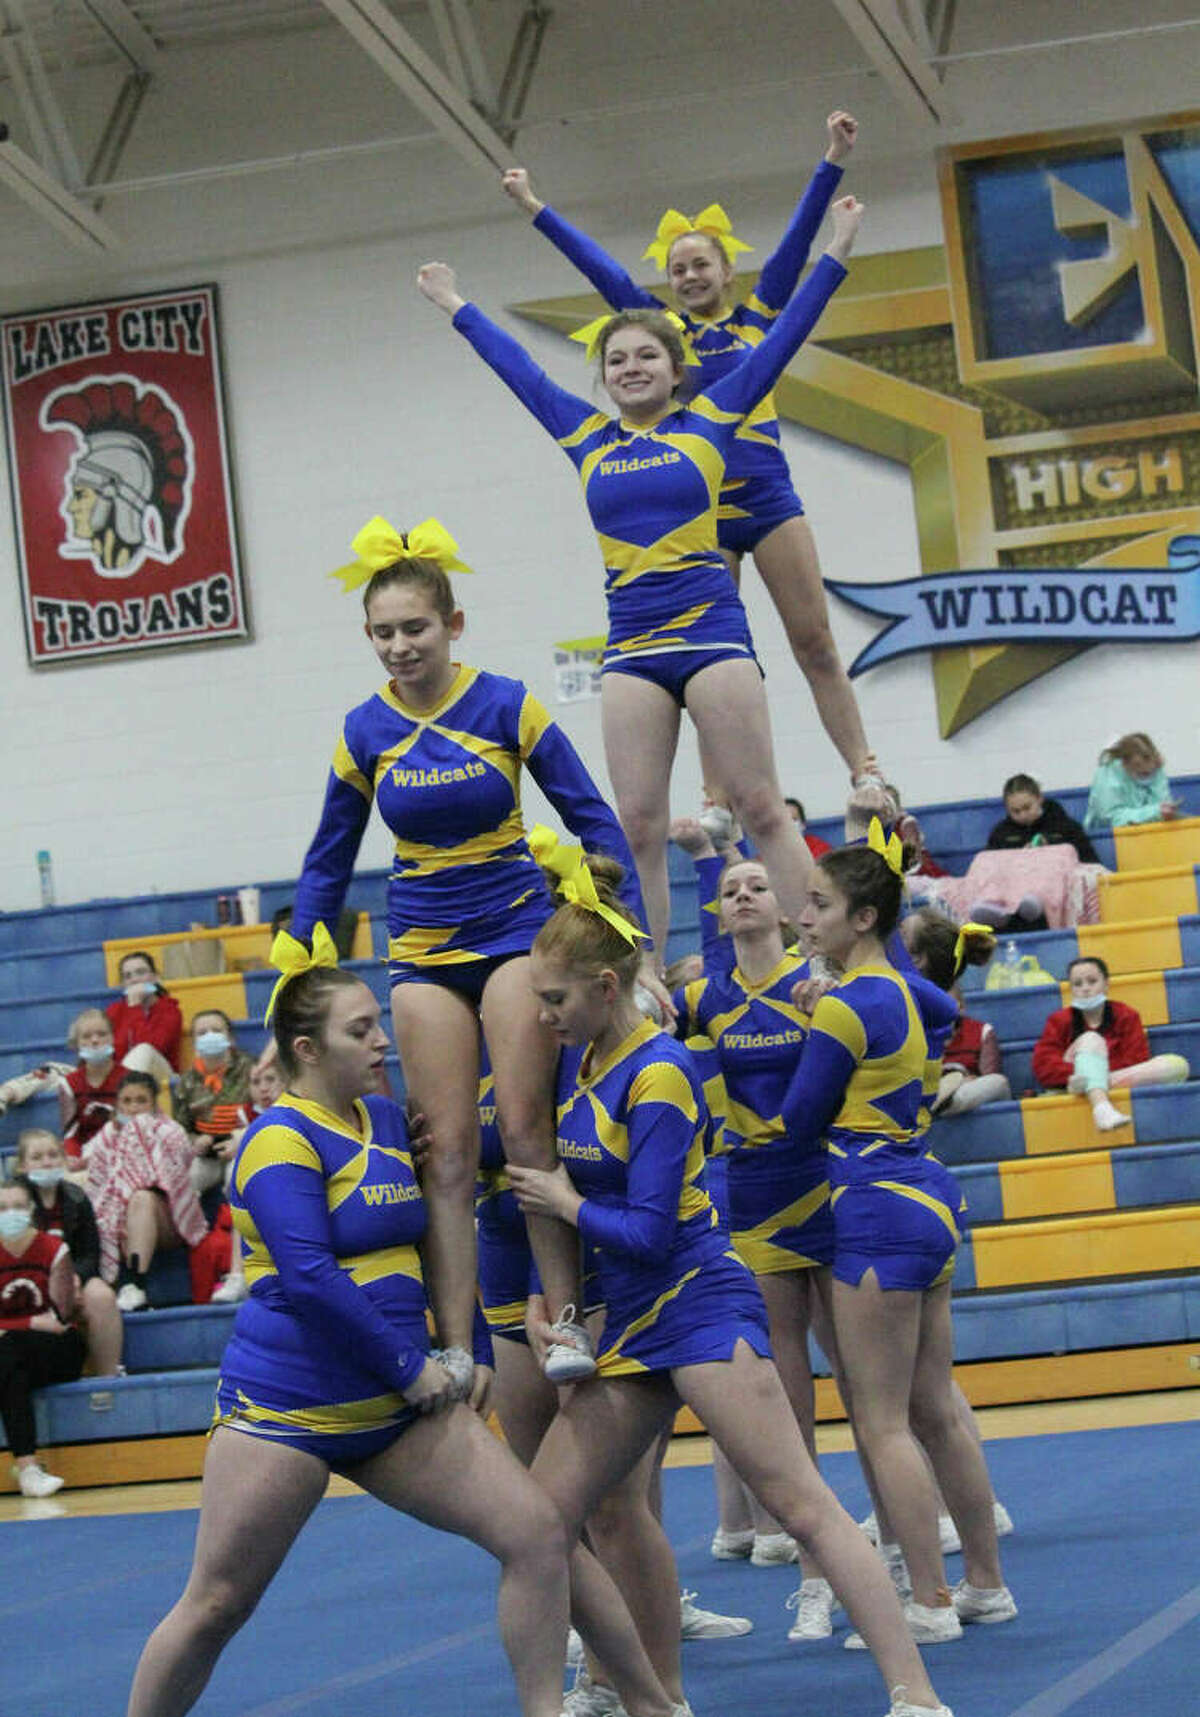 The Evart High School competitive cheer team competes at a recent event.